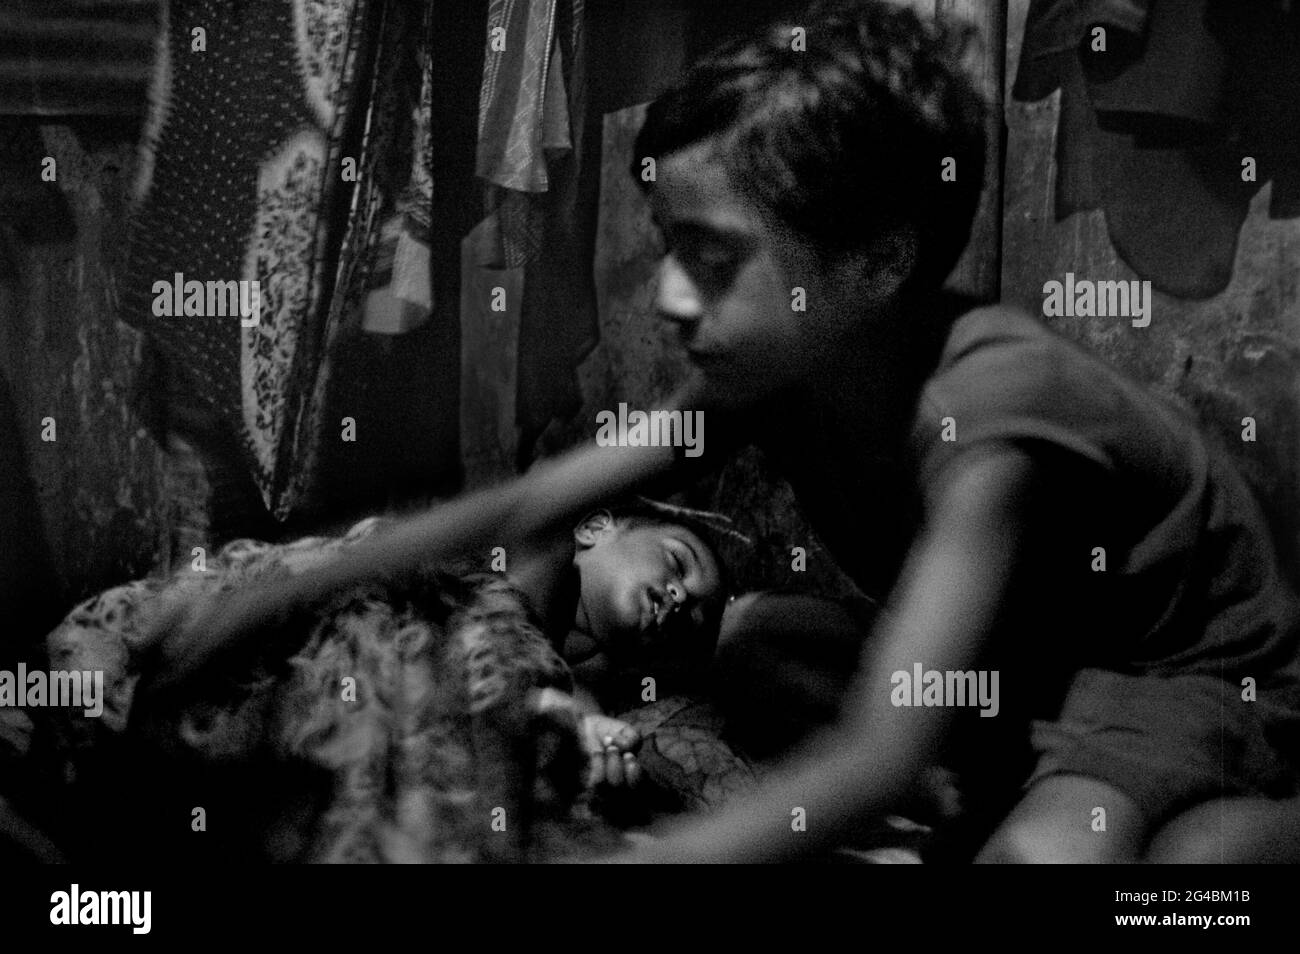 A baby nephew to look after when mother and sister-in-law aren’t around.  Dhaka, Bangladesh. May 2, 2007. Stock Photo